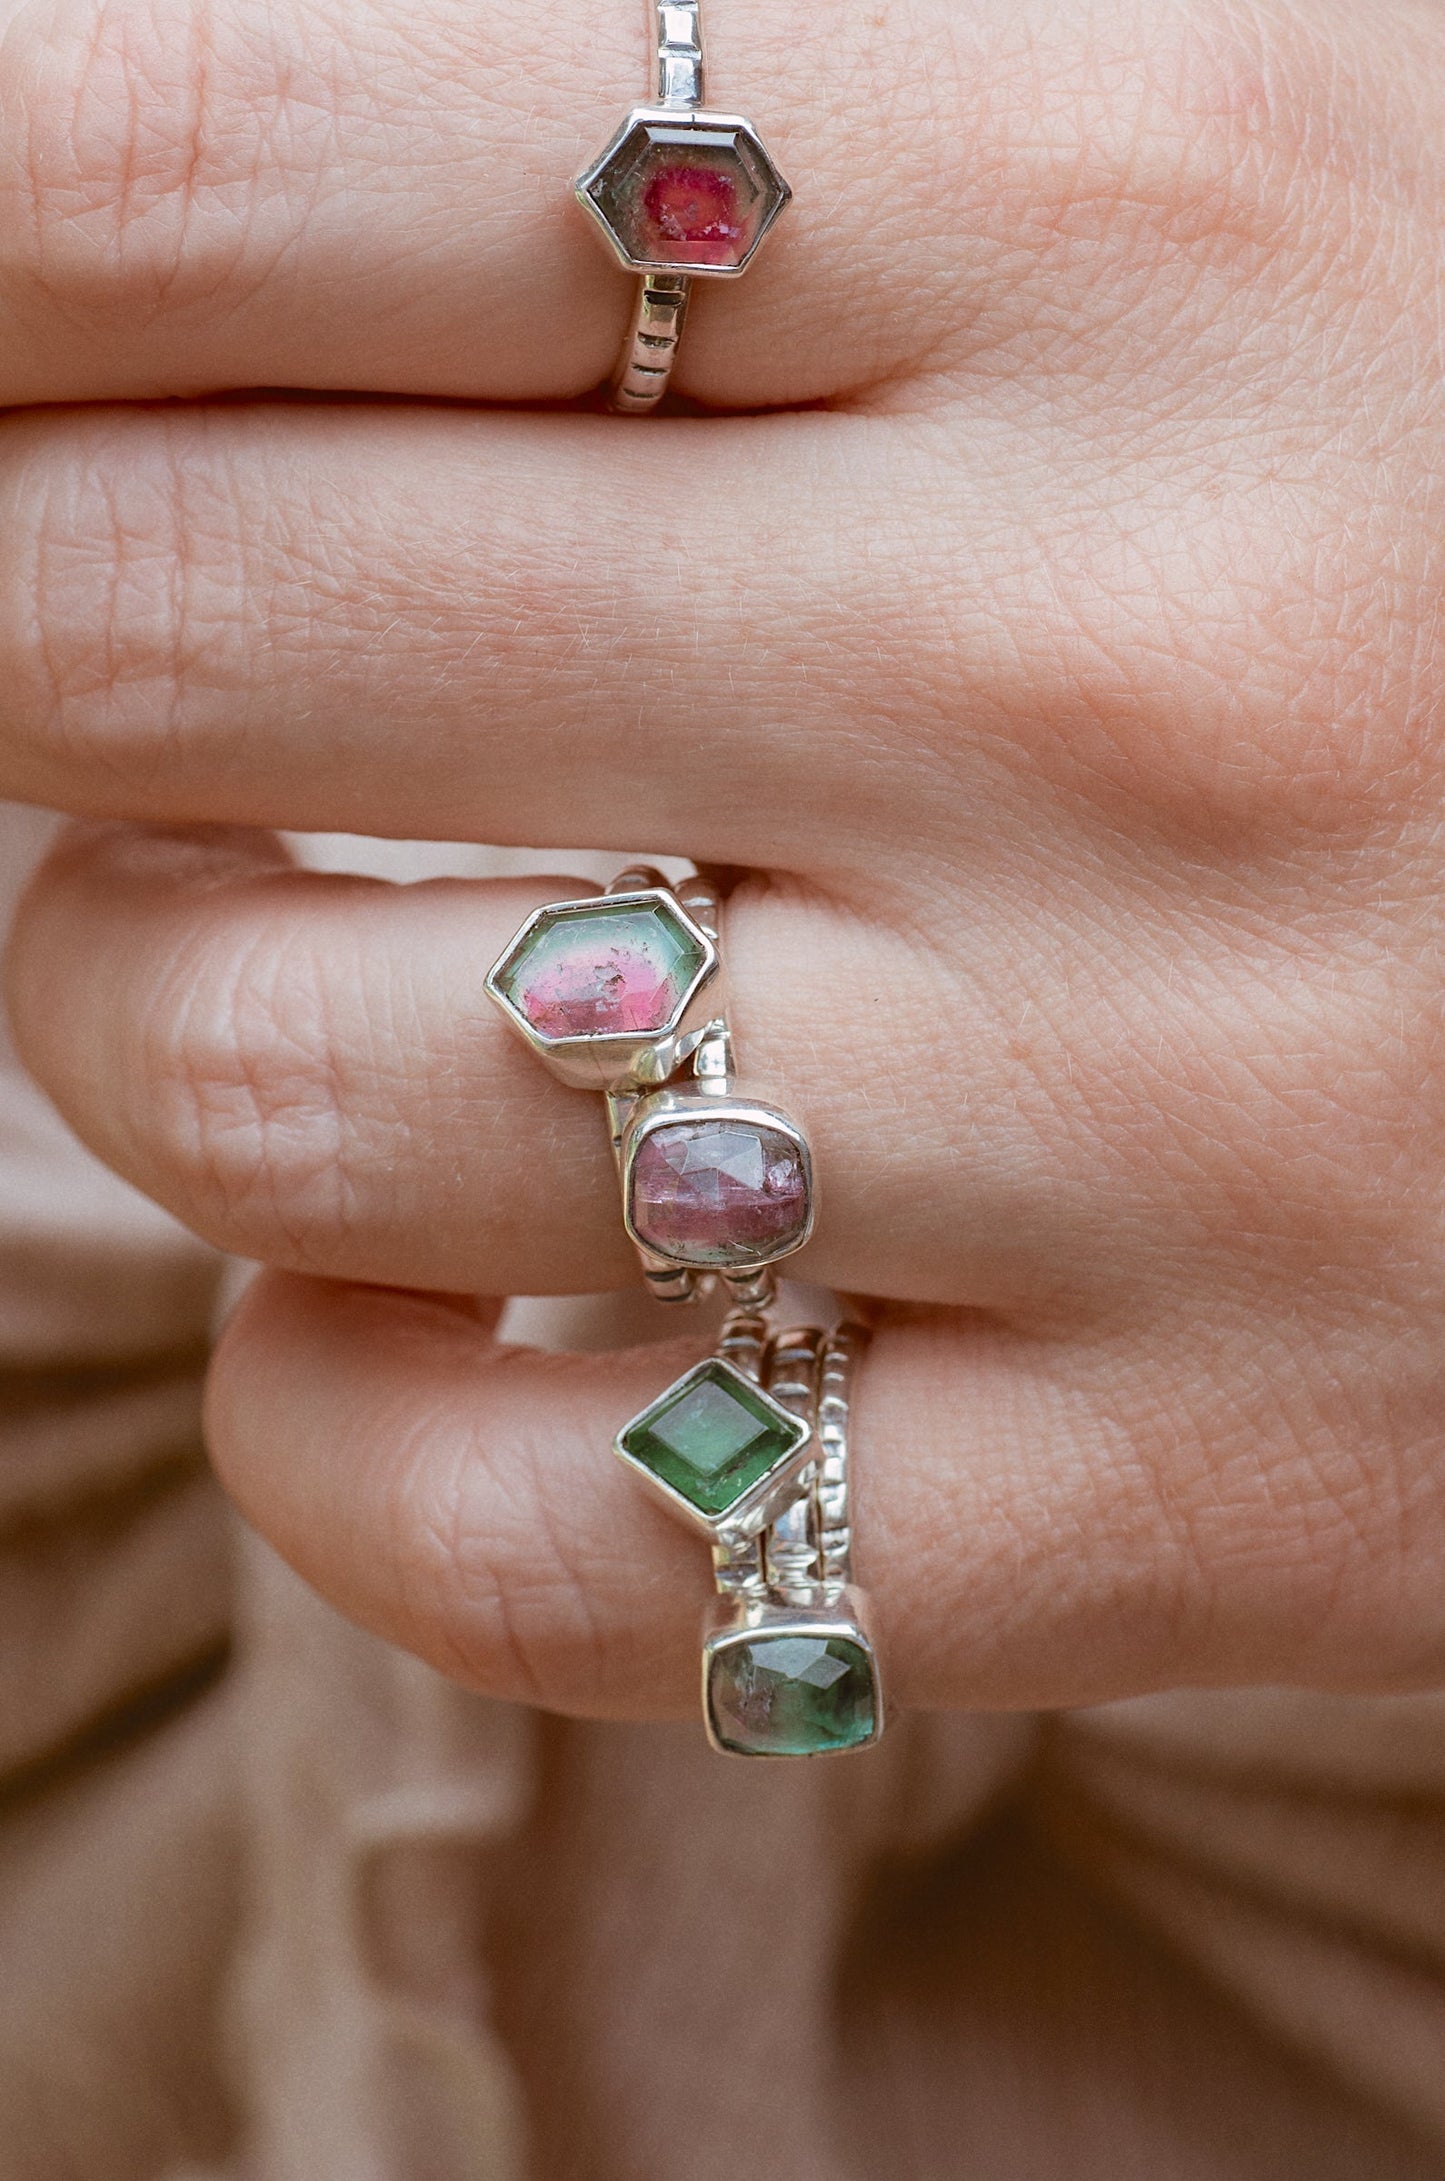 Faceted Tourmaline Stacking Ring ◇ Size 7.5